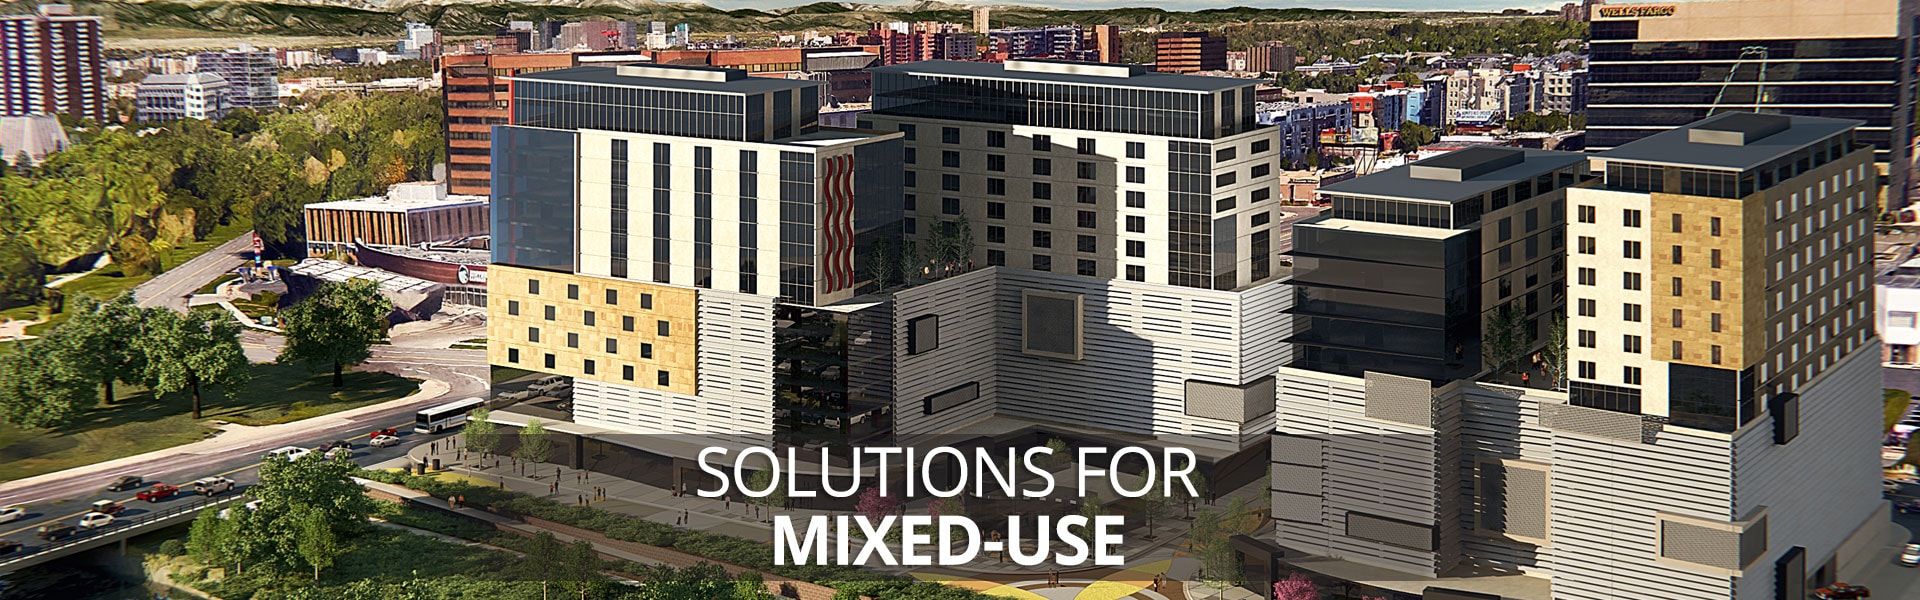 Mixed-Use Architects in Denver Colorado